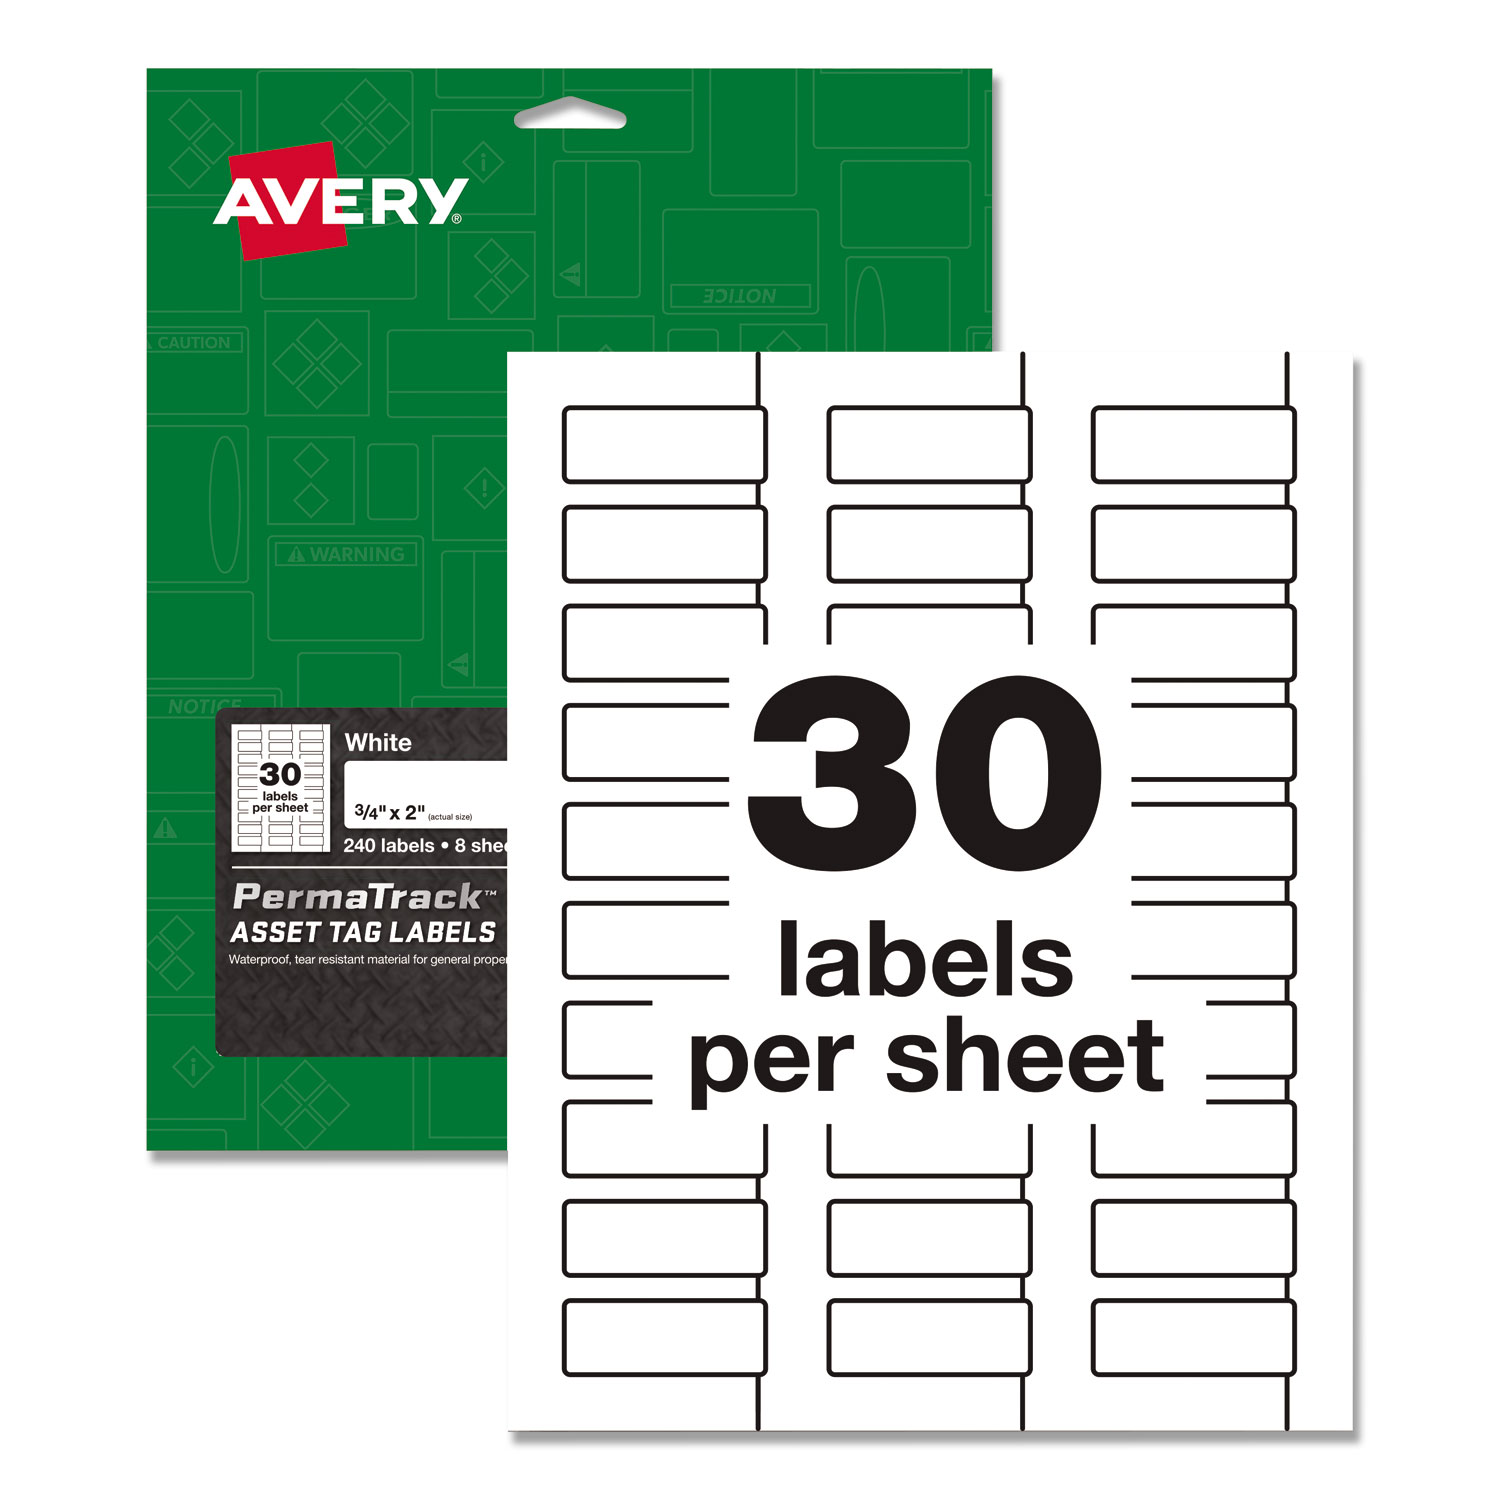  Avery 61526 PermaTrack Durable White Asset Tag Labels, Laser Printers, 0.75 x 2, White, 30/Sheet, 8 Sheets/Pack (AVE61526) 